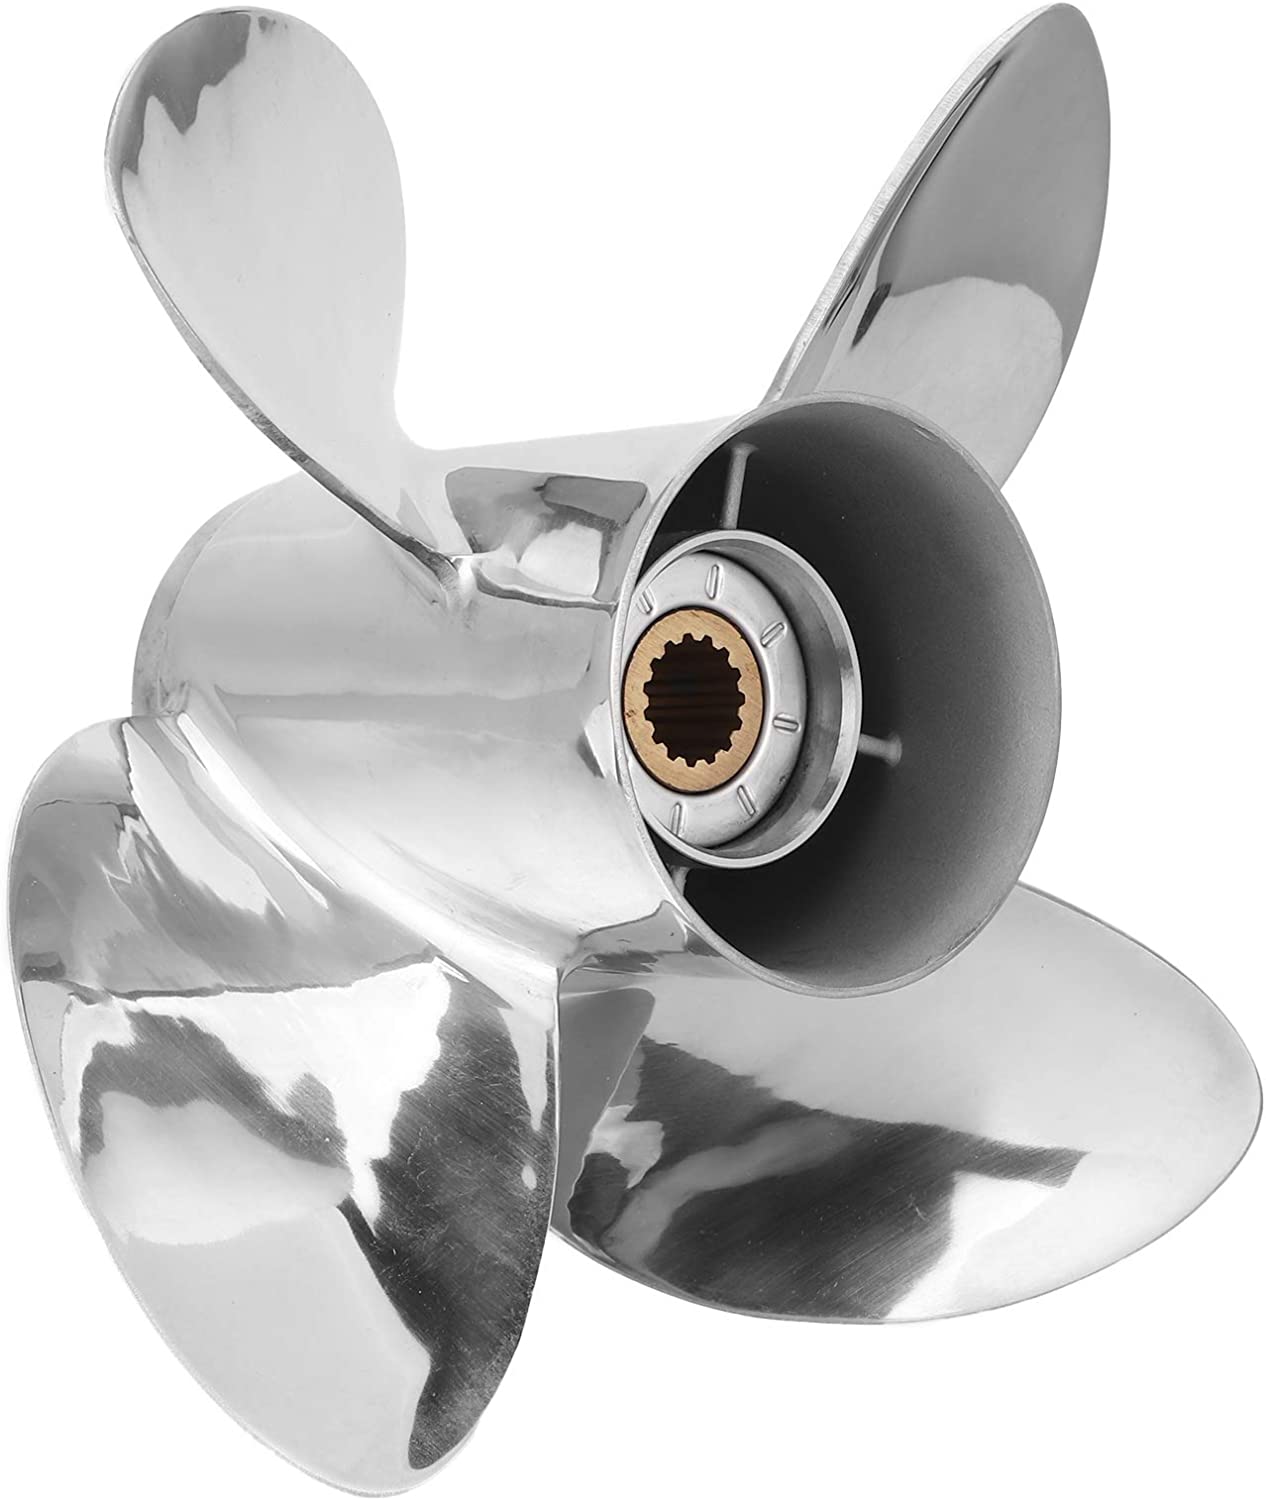 VIF OEM Upgrade 15 1/4 x 18,15 1/4 x 20, 15 1/4x 22, 15 1/4 x 24 Series Stainless Steel Propeller for Yamaha Outboard Motos 150-250 HP, 15 Spline Tooth, RH